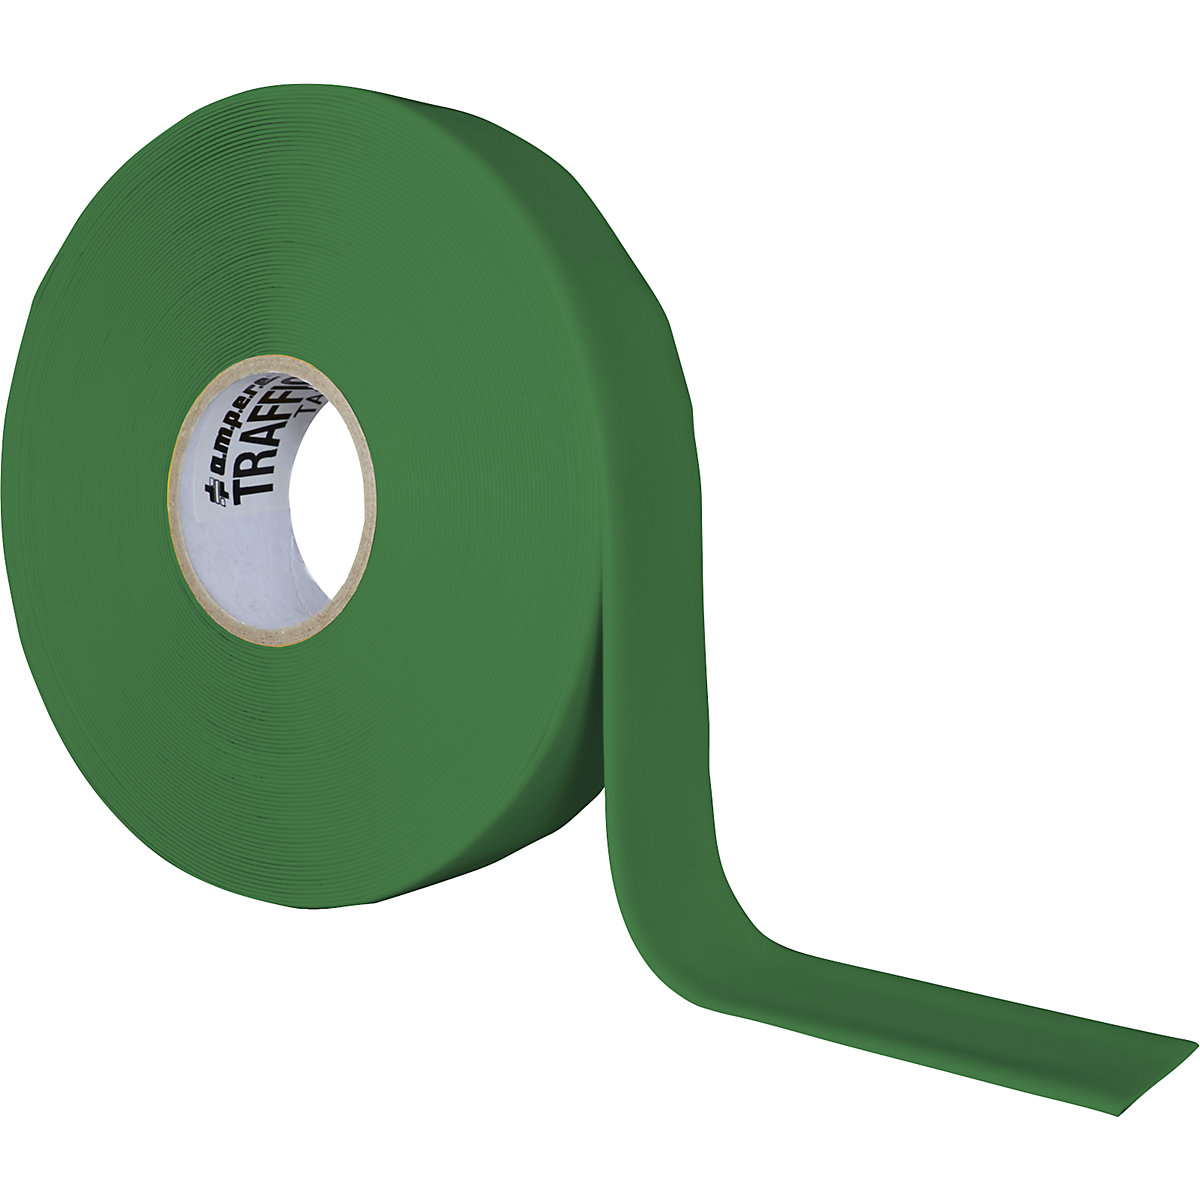 Floor marking tape, extra strong – Ampere